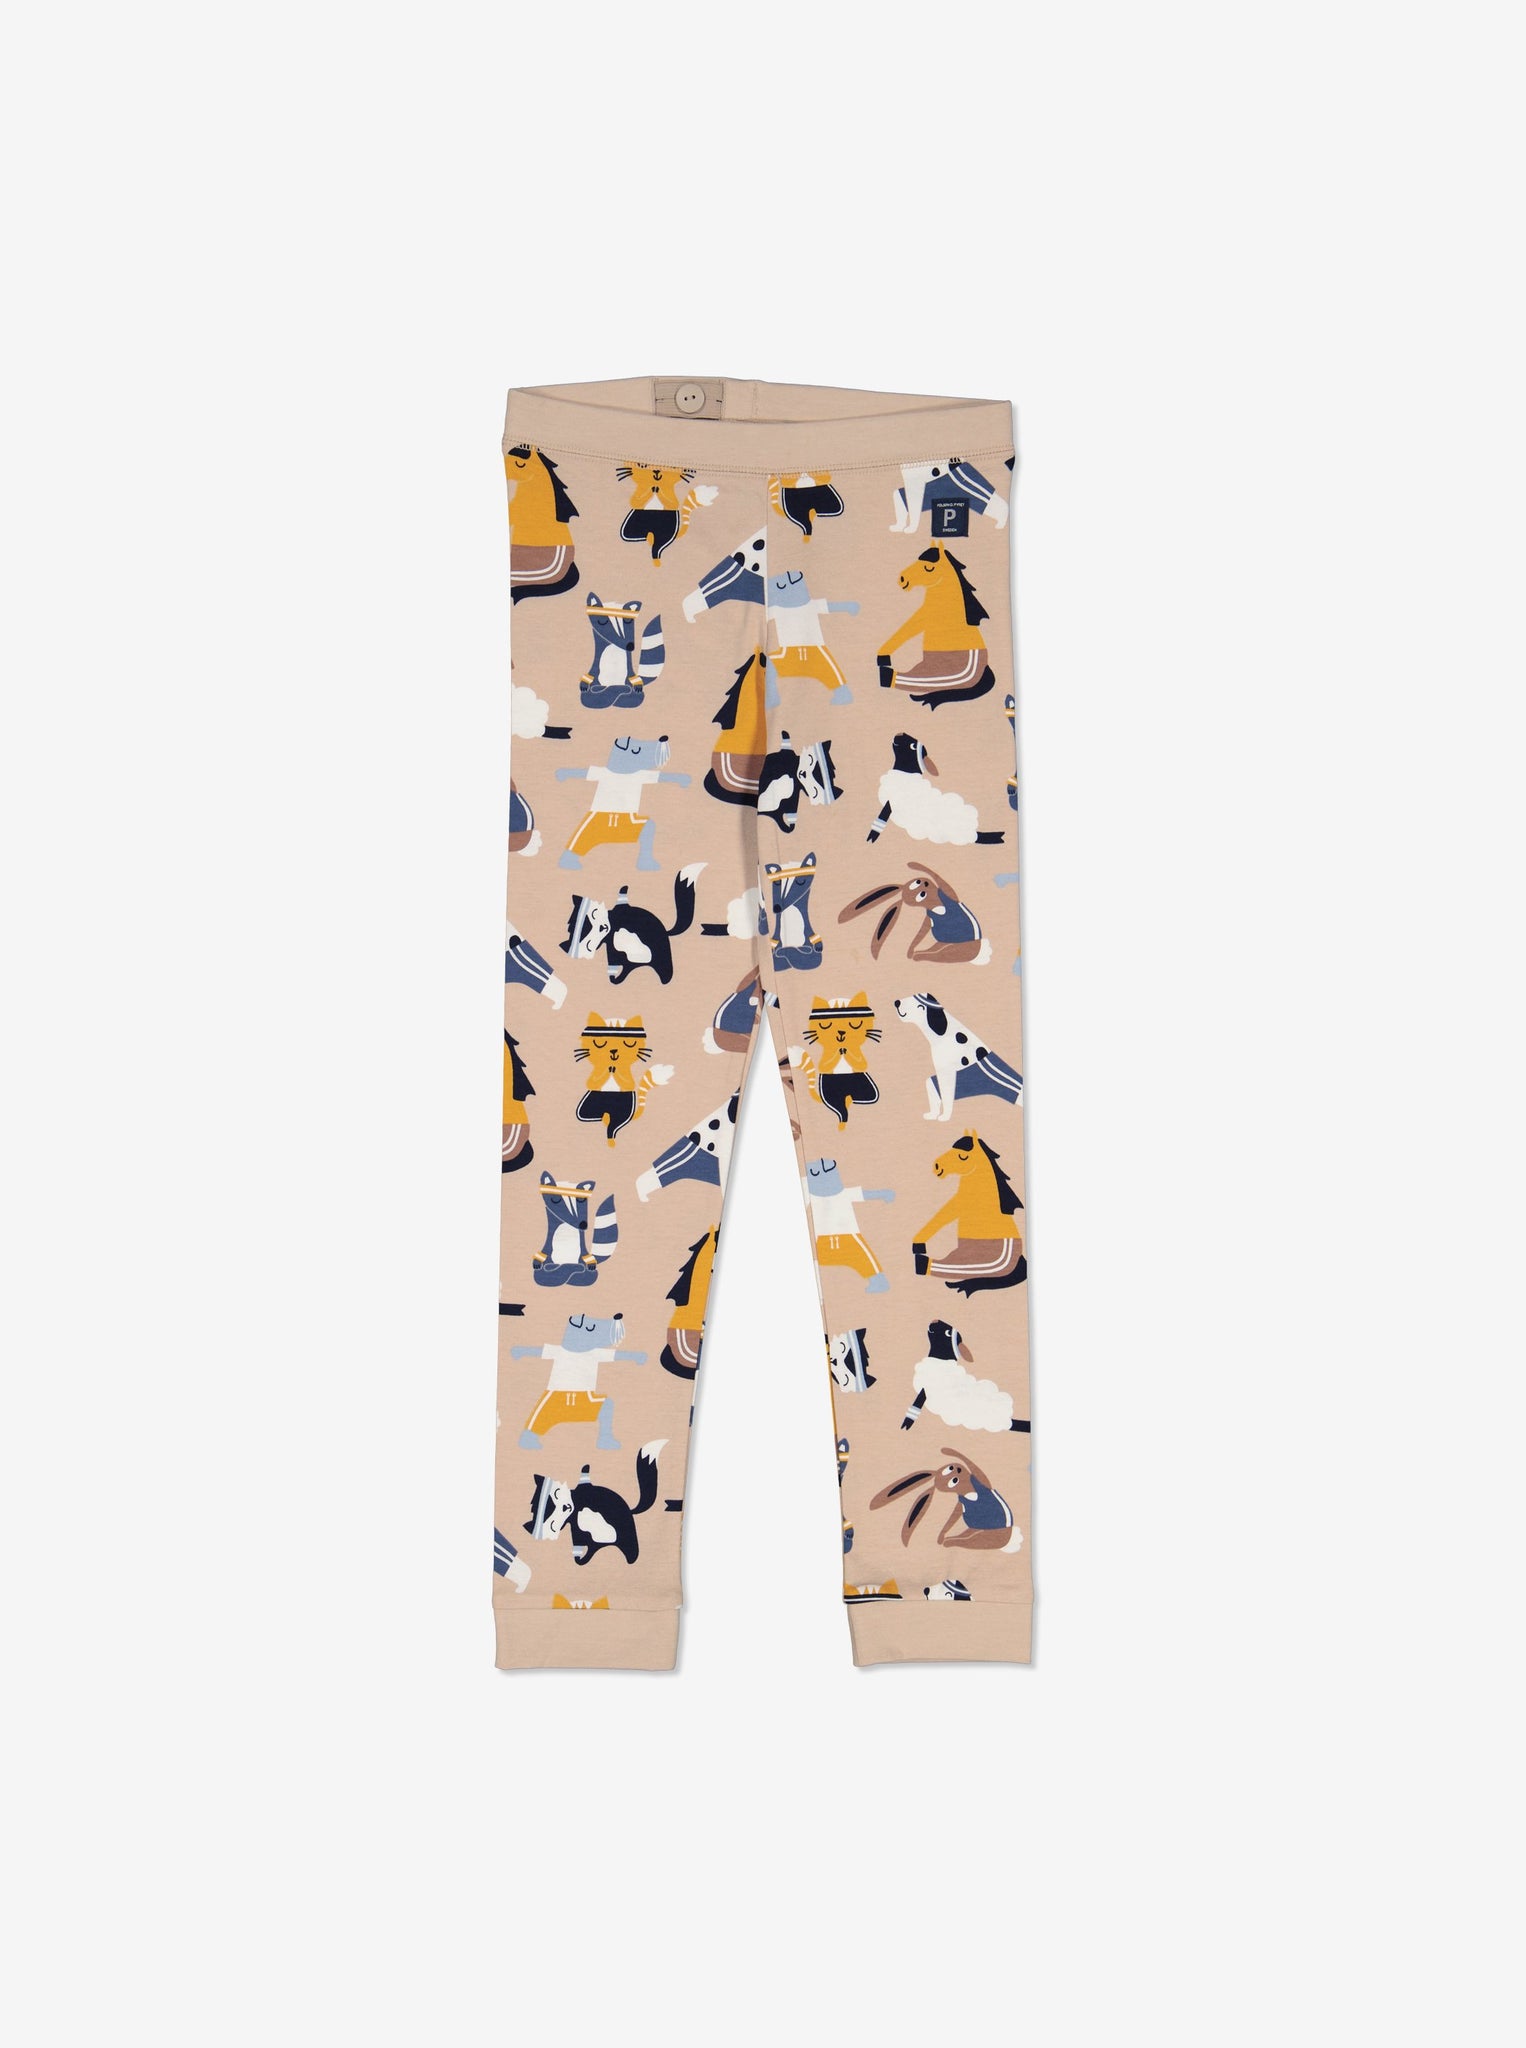  Organic Beige Animal Kids Leggings from Polarn O. Pyret Kidswear. Made from environmentally friendly materials.